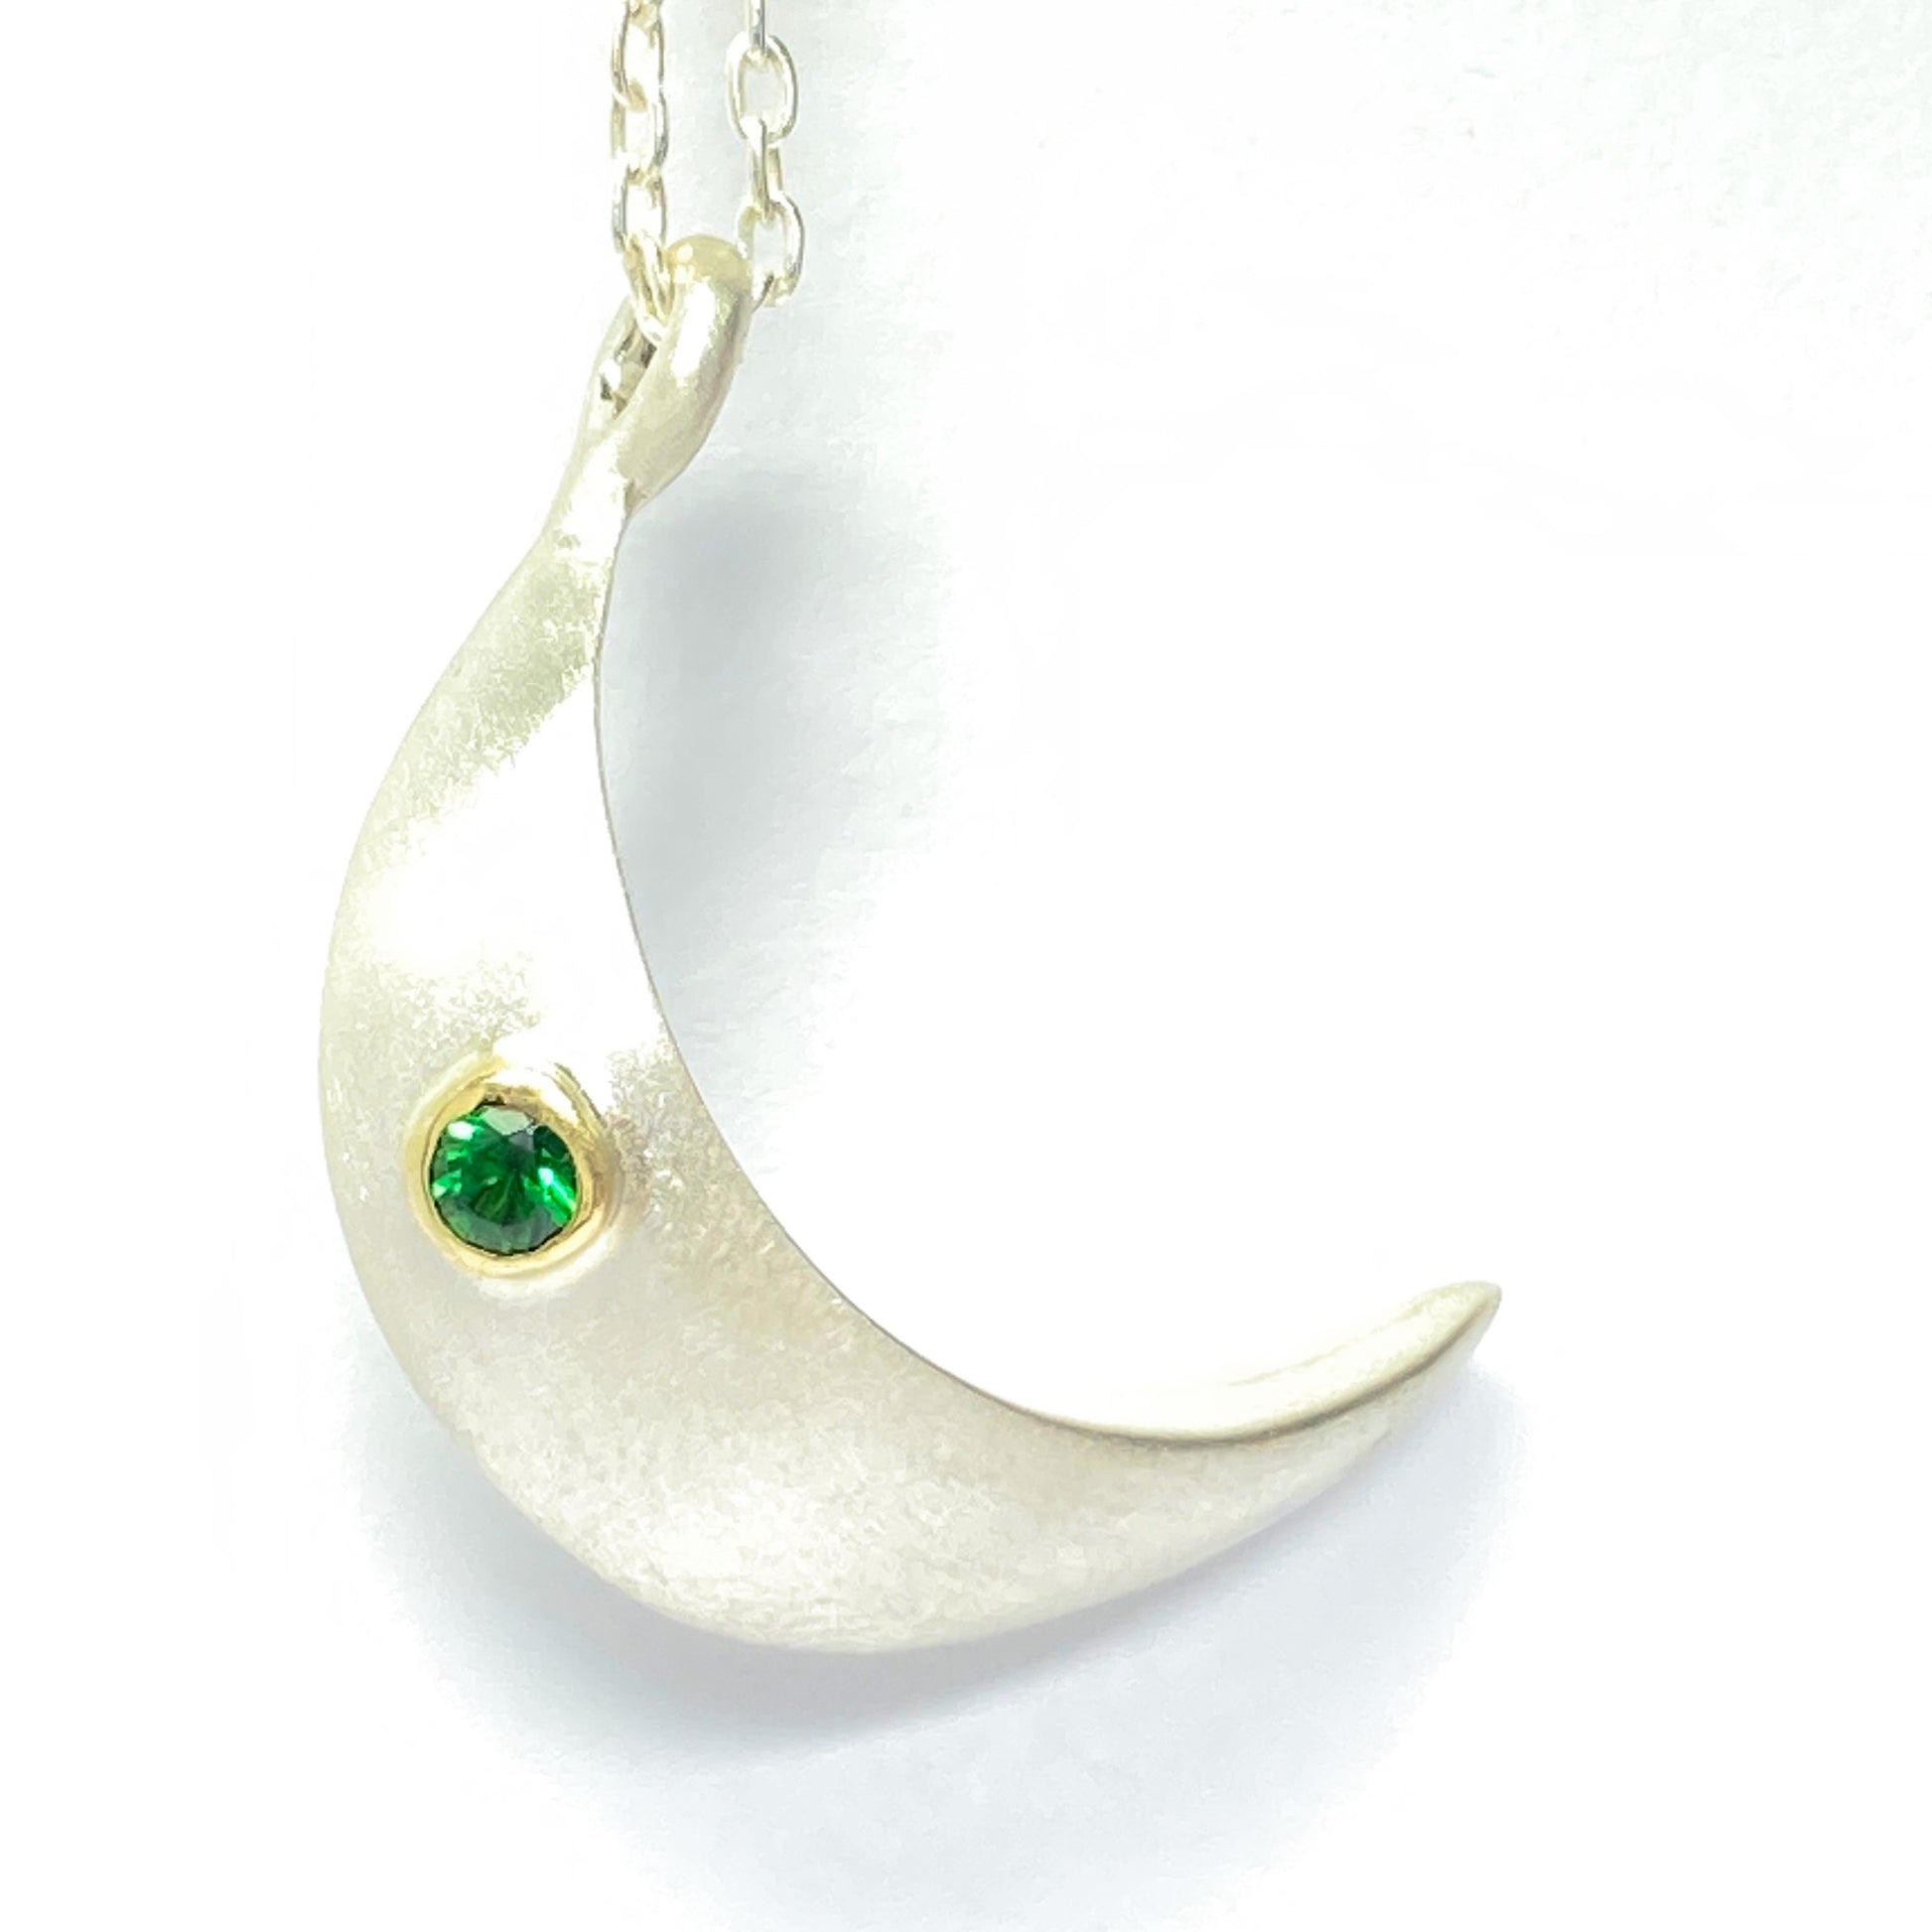 Keep your loved ones close to your heart with our cremation moon necklace. Crafted with care, this necklace allows you to carry a small portion of their ashes, providing comfort and a constant reminder of their presence.  Details.  -1 inch Handmade moon from the top of moon to the bottom.  -The ashes are securely inside the hollow moon. - Stone of your choice. - 24 inch cable chain. - Satin finish or high polish - choice of stone, depending on the stone price may vary.